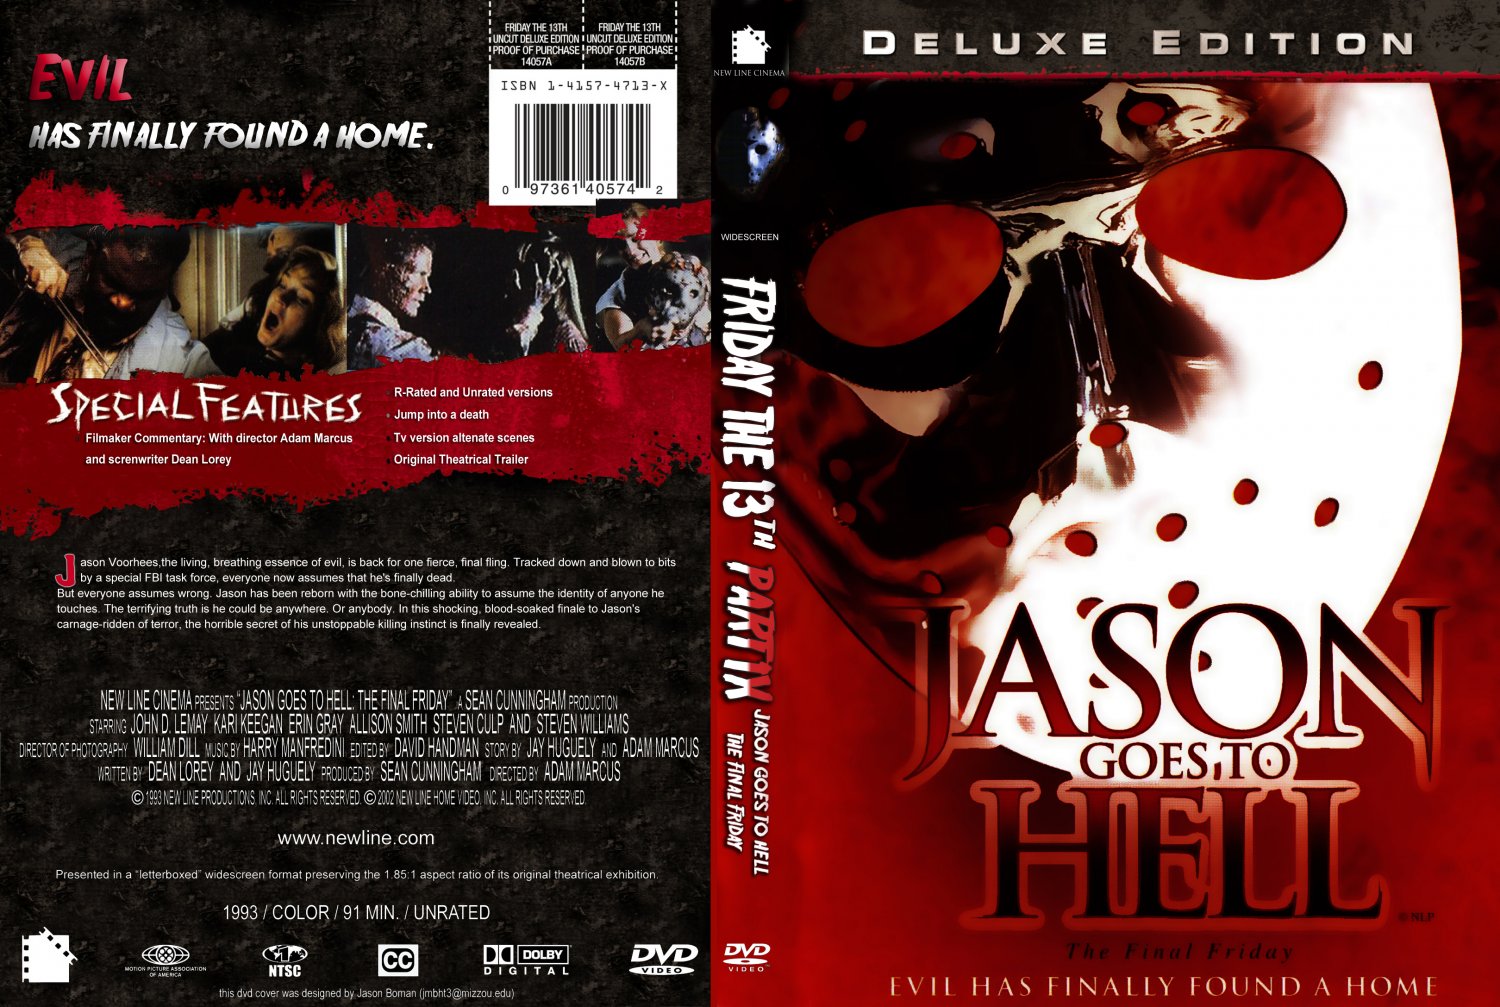 Friday The 13th Part 9 - Jason Goes To Hell- Movie DVD Custom Covers - Frid...